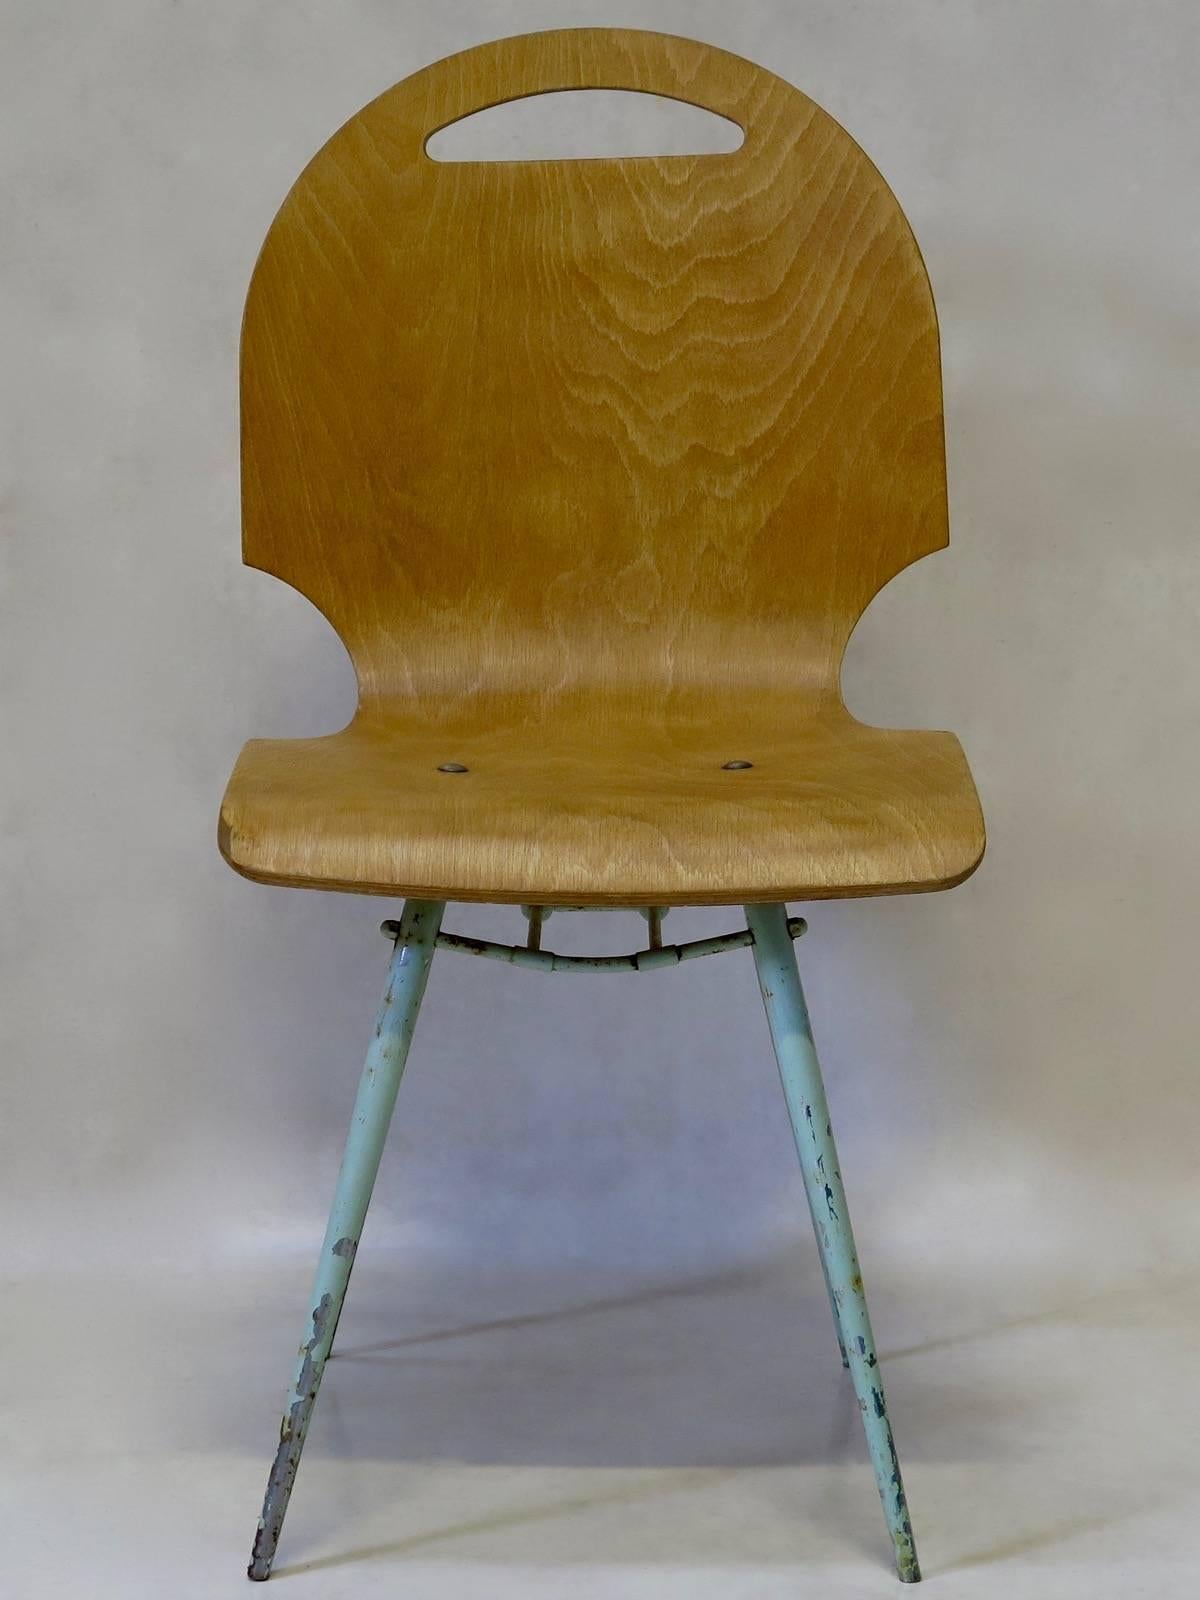 Four molded plywood chairs with unusual cut-out designs on the sides and top of the seats (forming a handle). The top is fixed to a tubular metal base, painted a light blue/green color, with tapering and splayed legs.

Very light and sturdy.